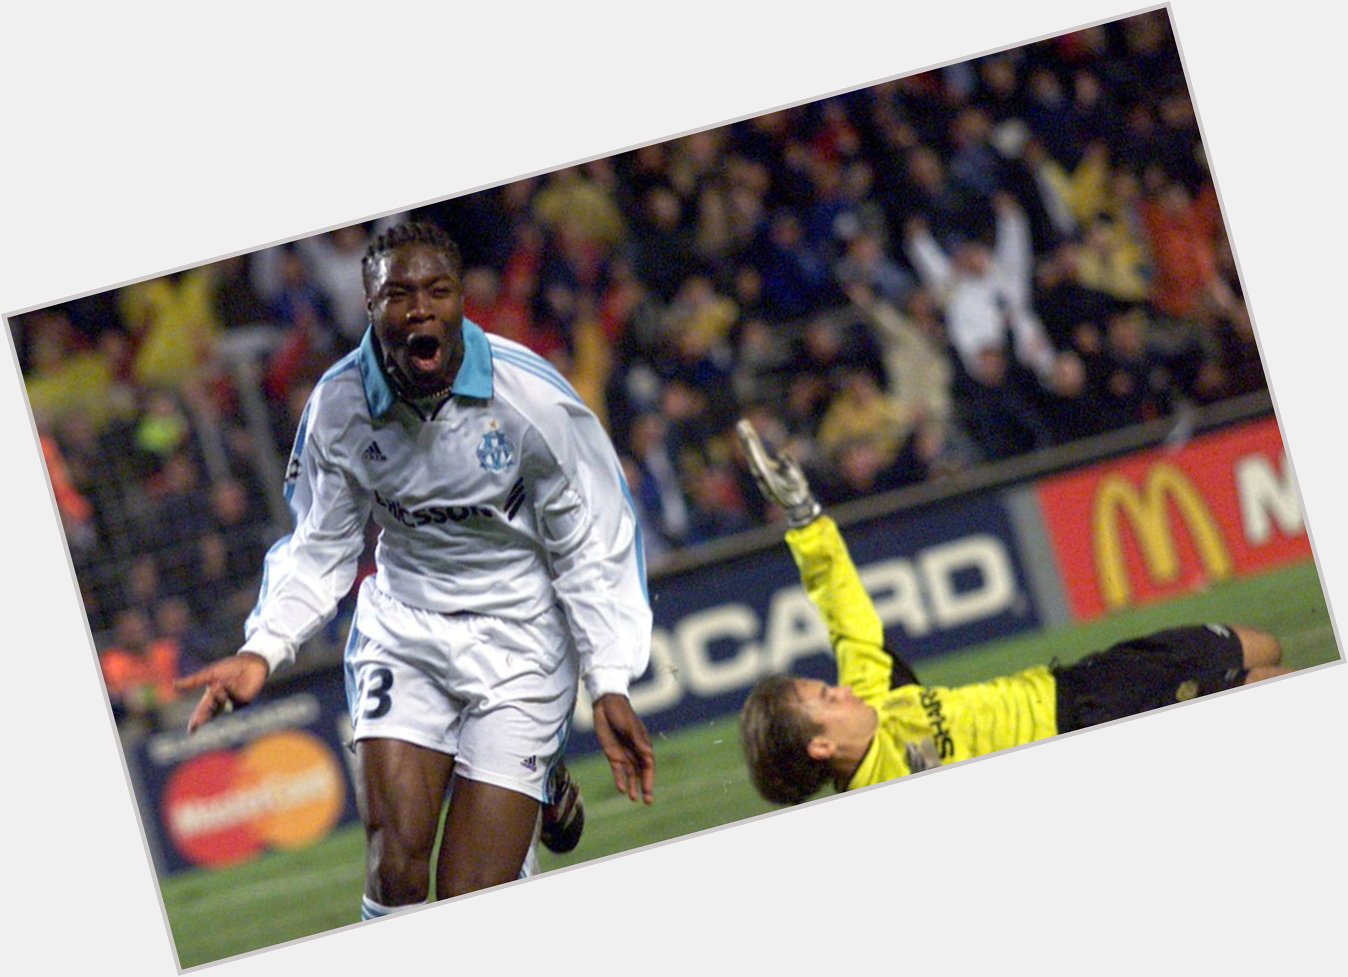 Happy Birthday, William Gallas.

The best bit of this goal is Mark Bosnich trying to header it.  